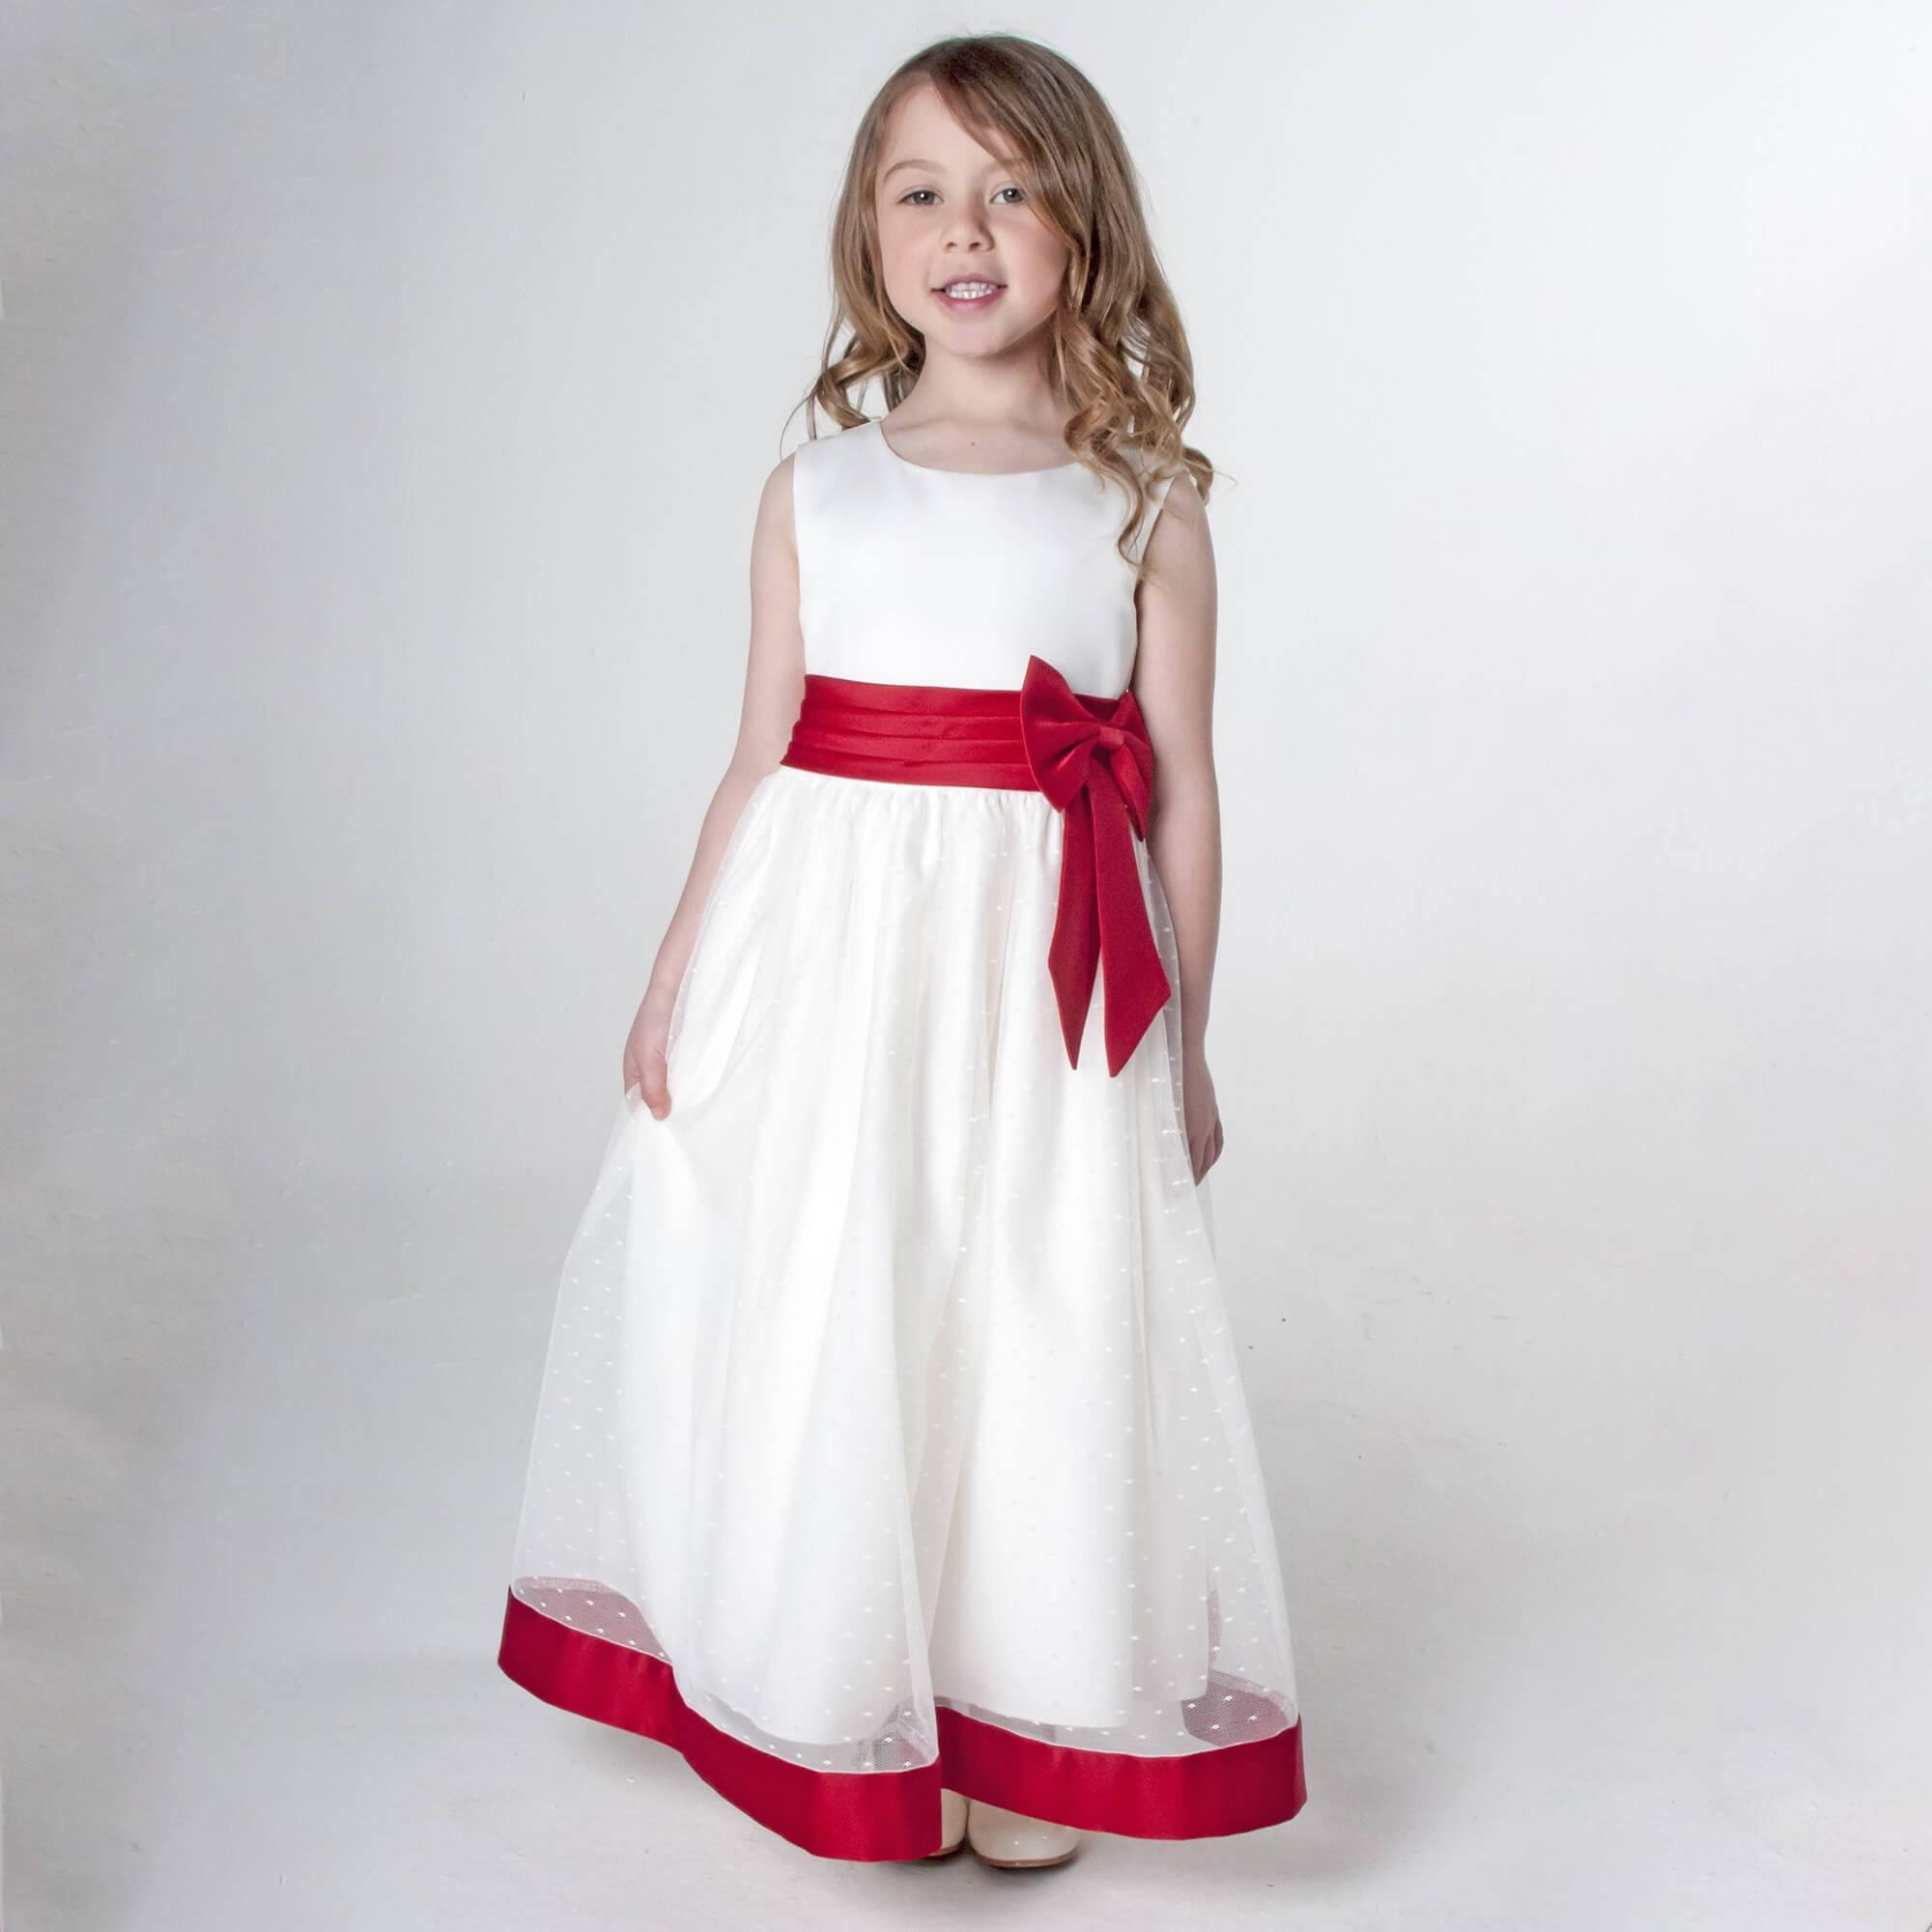 White flower girl dress with red trim